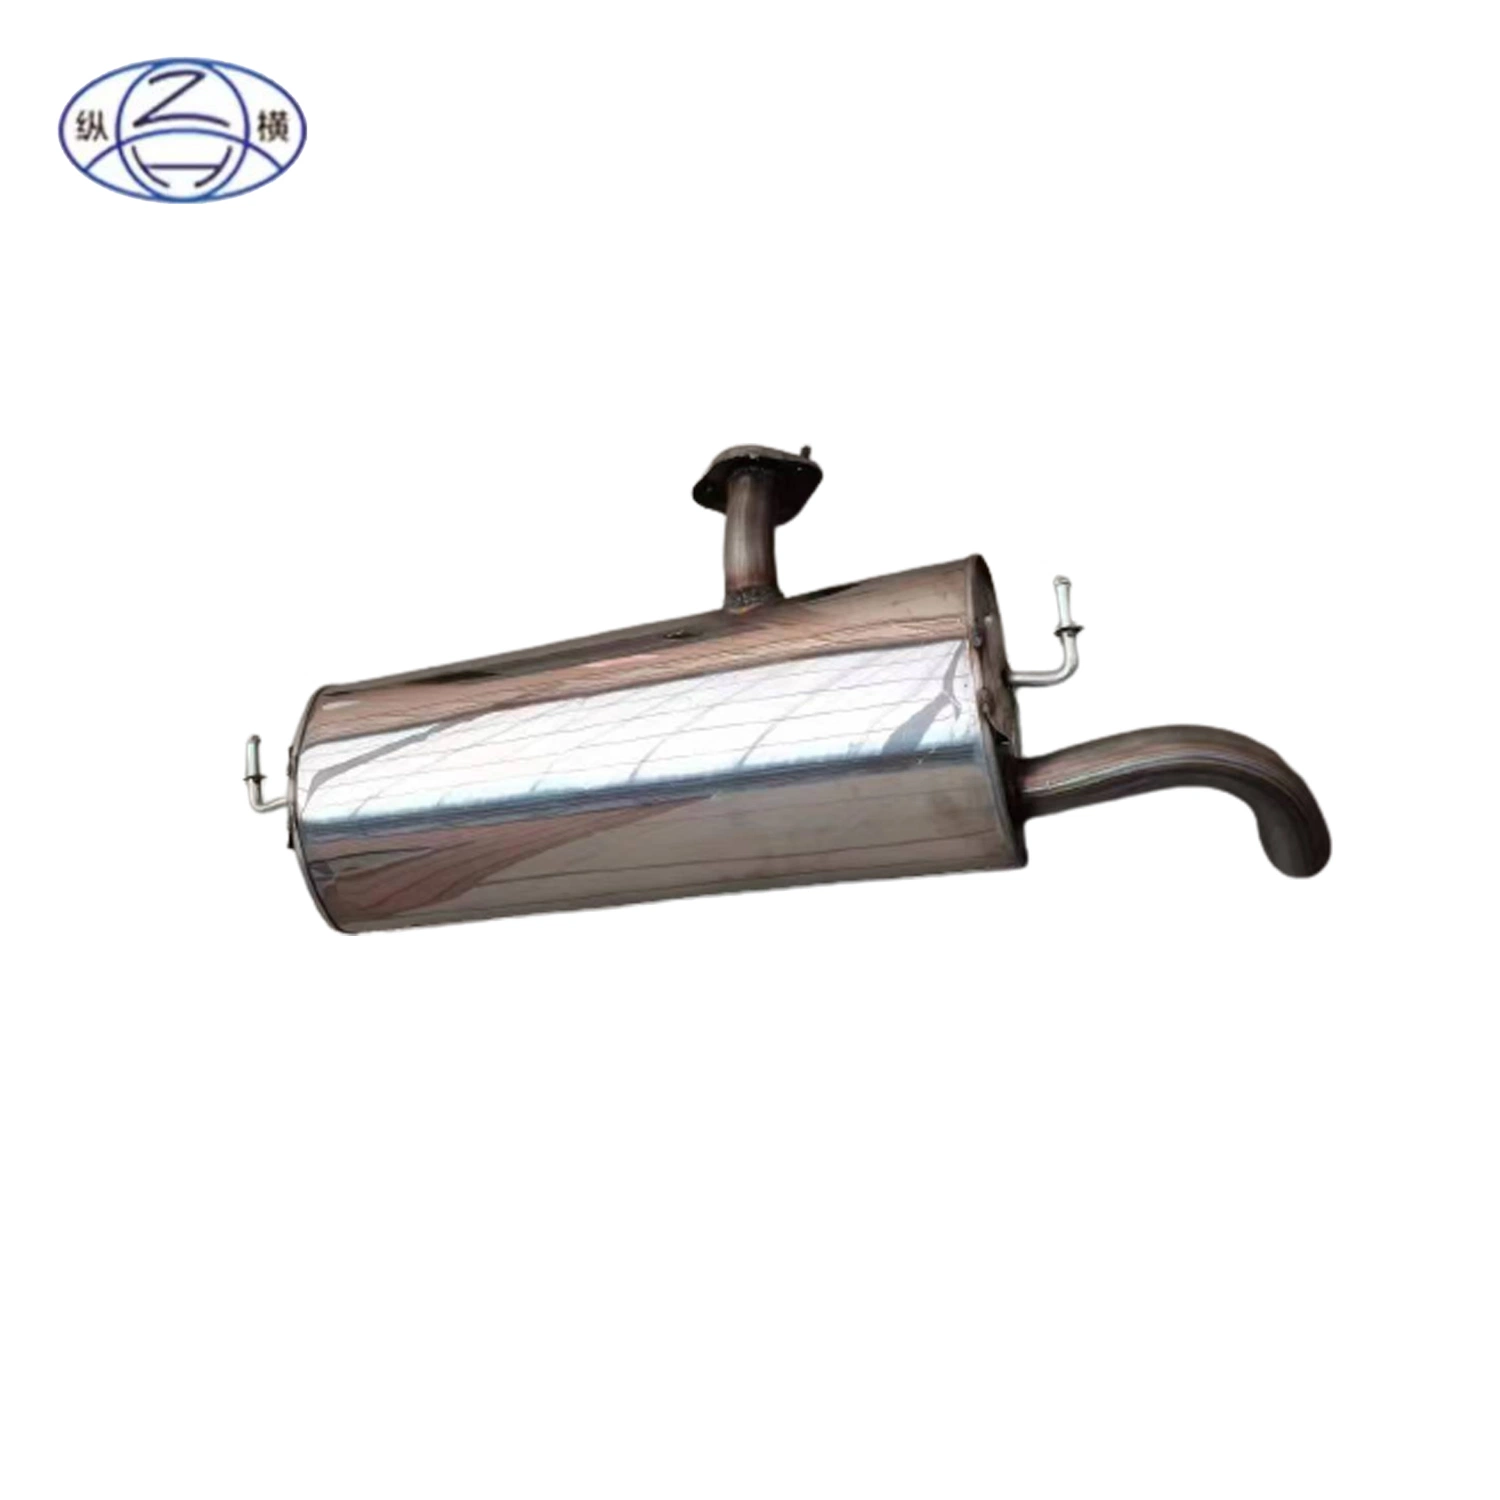 Chang&prime; an CS55pius Rear Section Exhaust Muffler Tail Pipe Made by Stainless Steel for Muffler